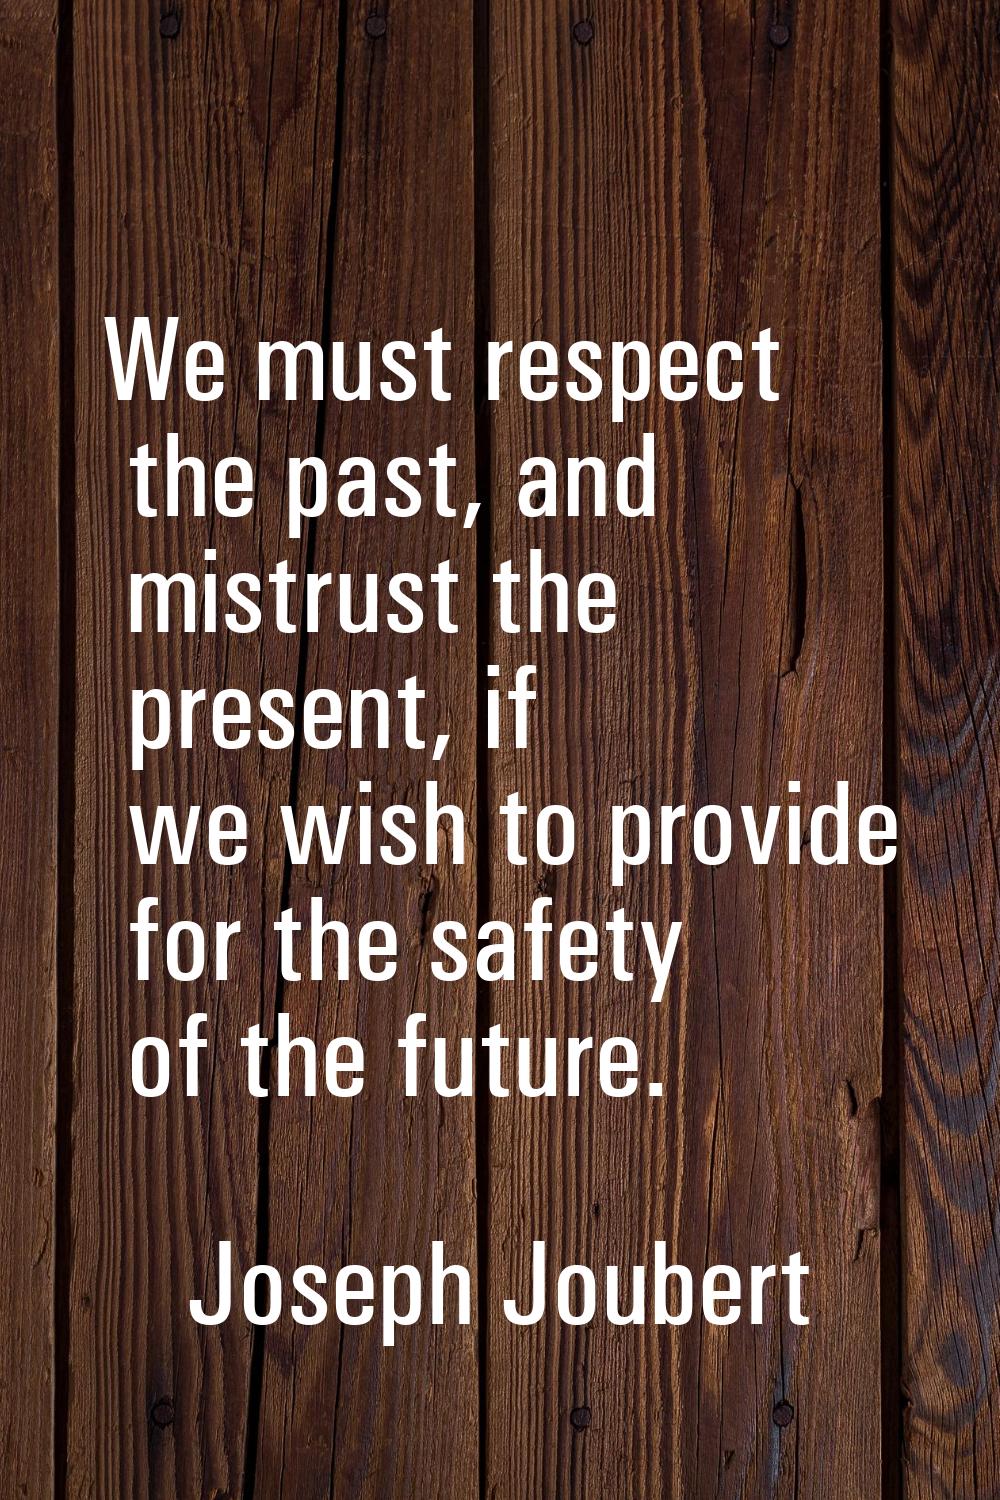 We must respect the past, and mistrust the present, if we wish to provide for the safety of the fut